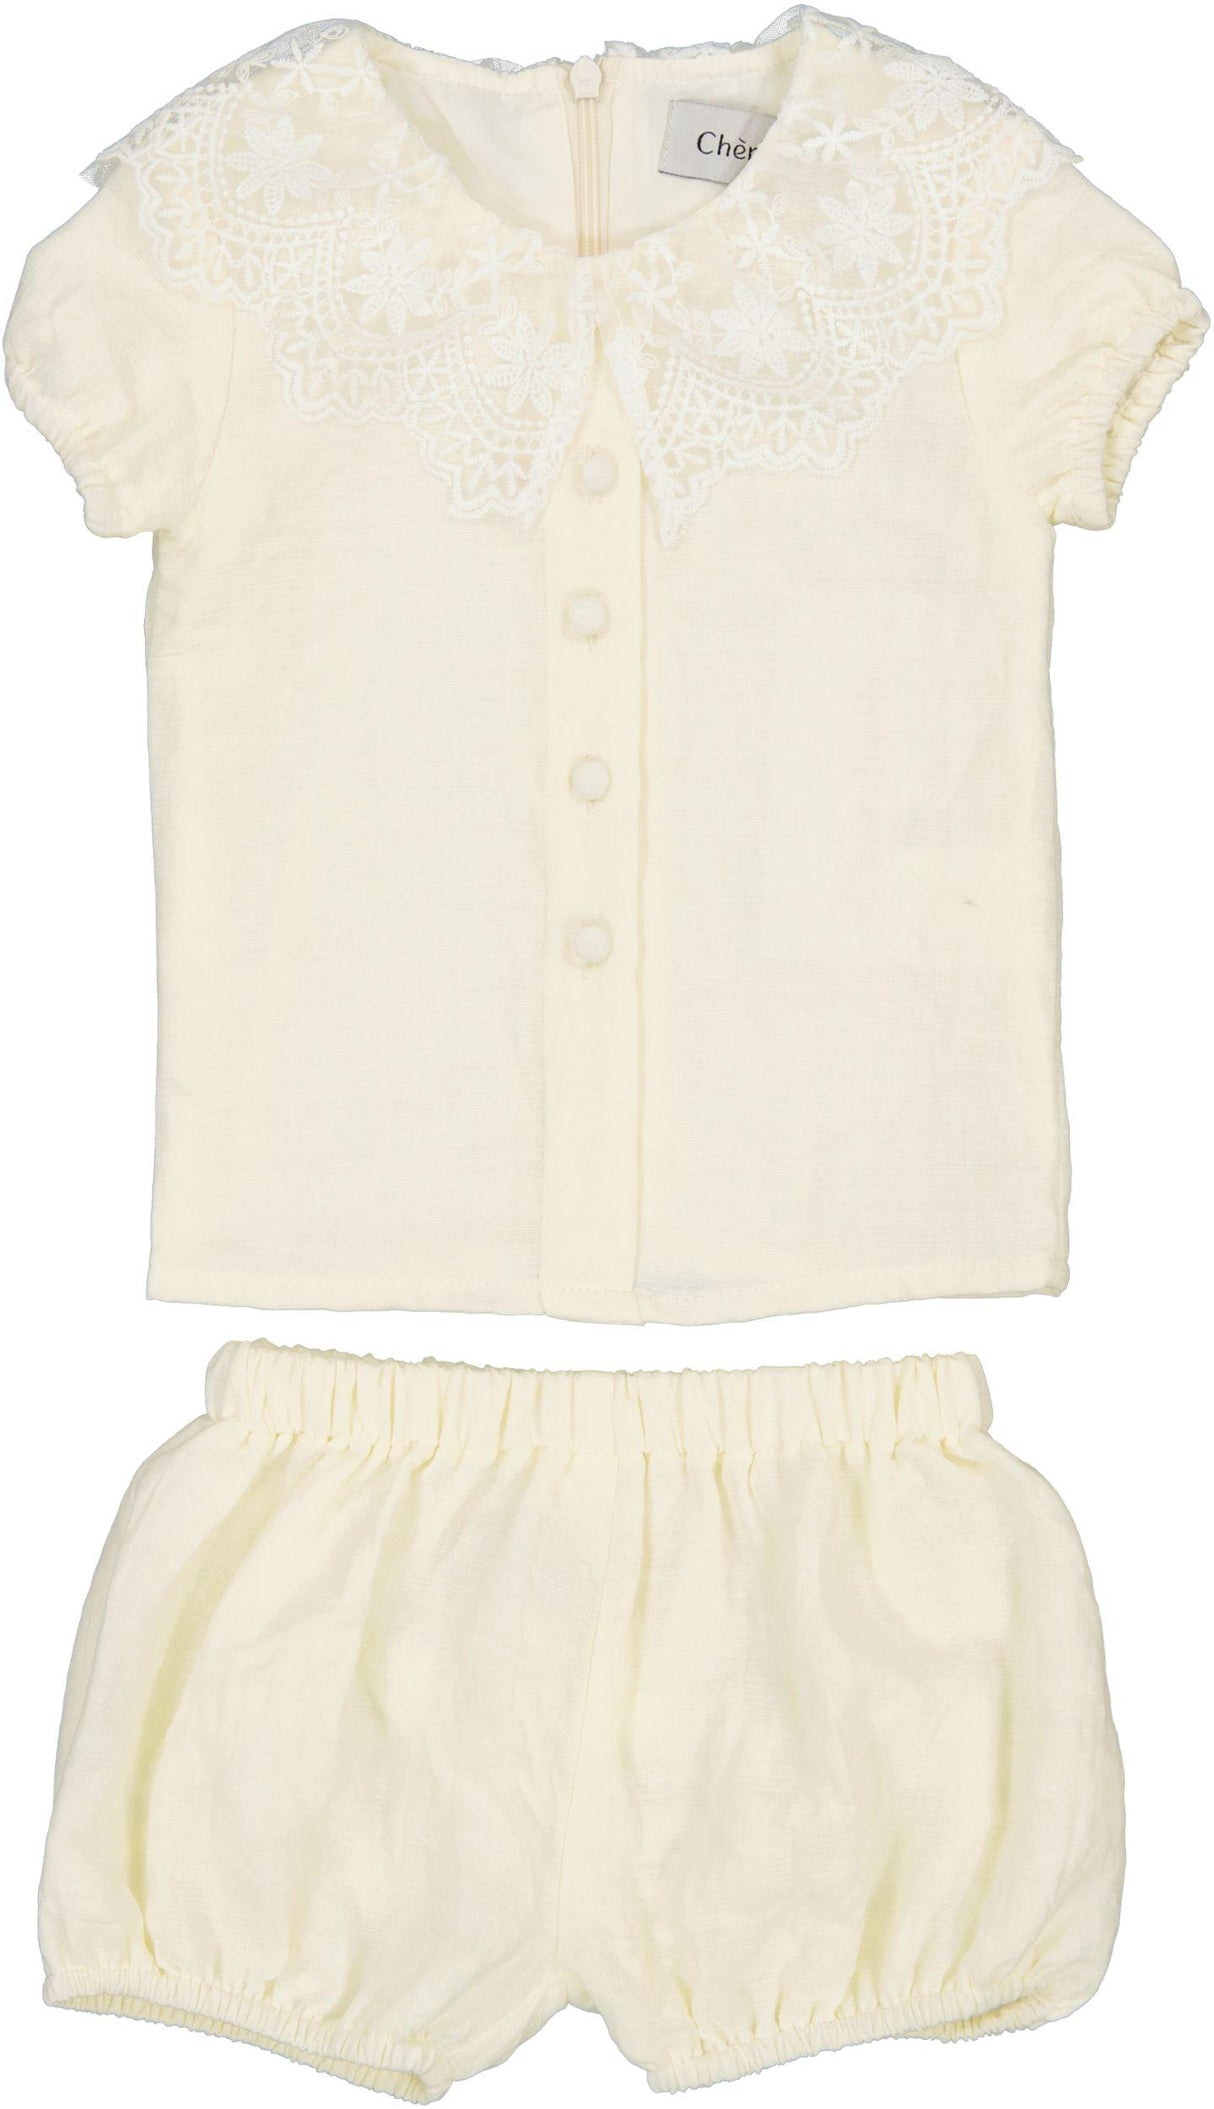 Cheribelle Baby Girls Lace Collar Outfit - 6102